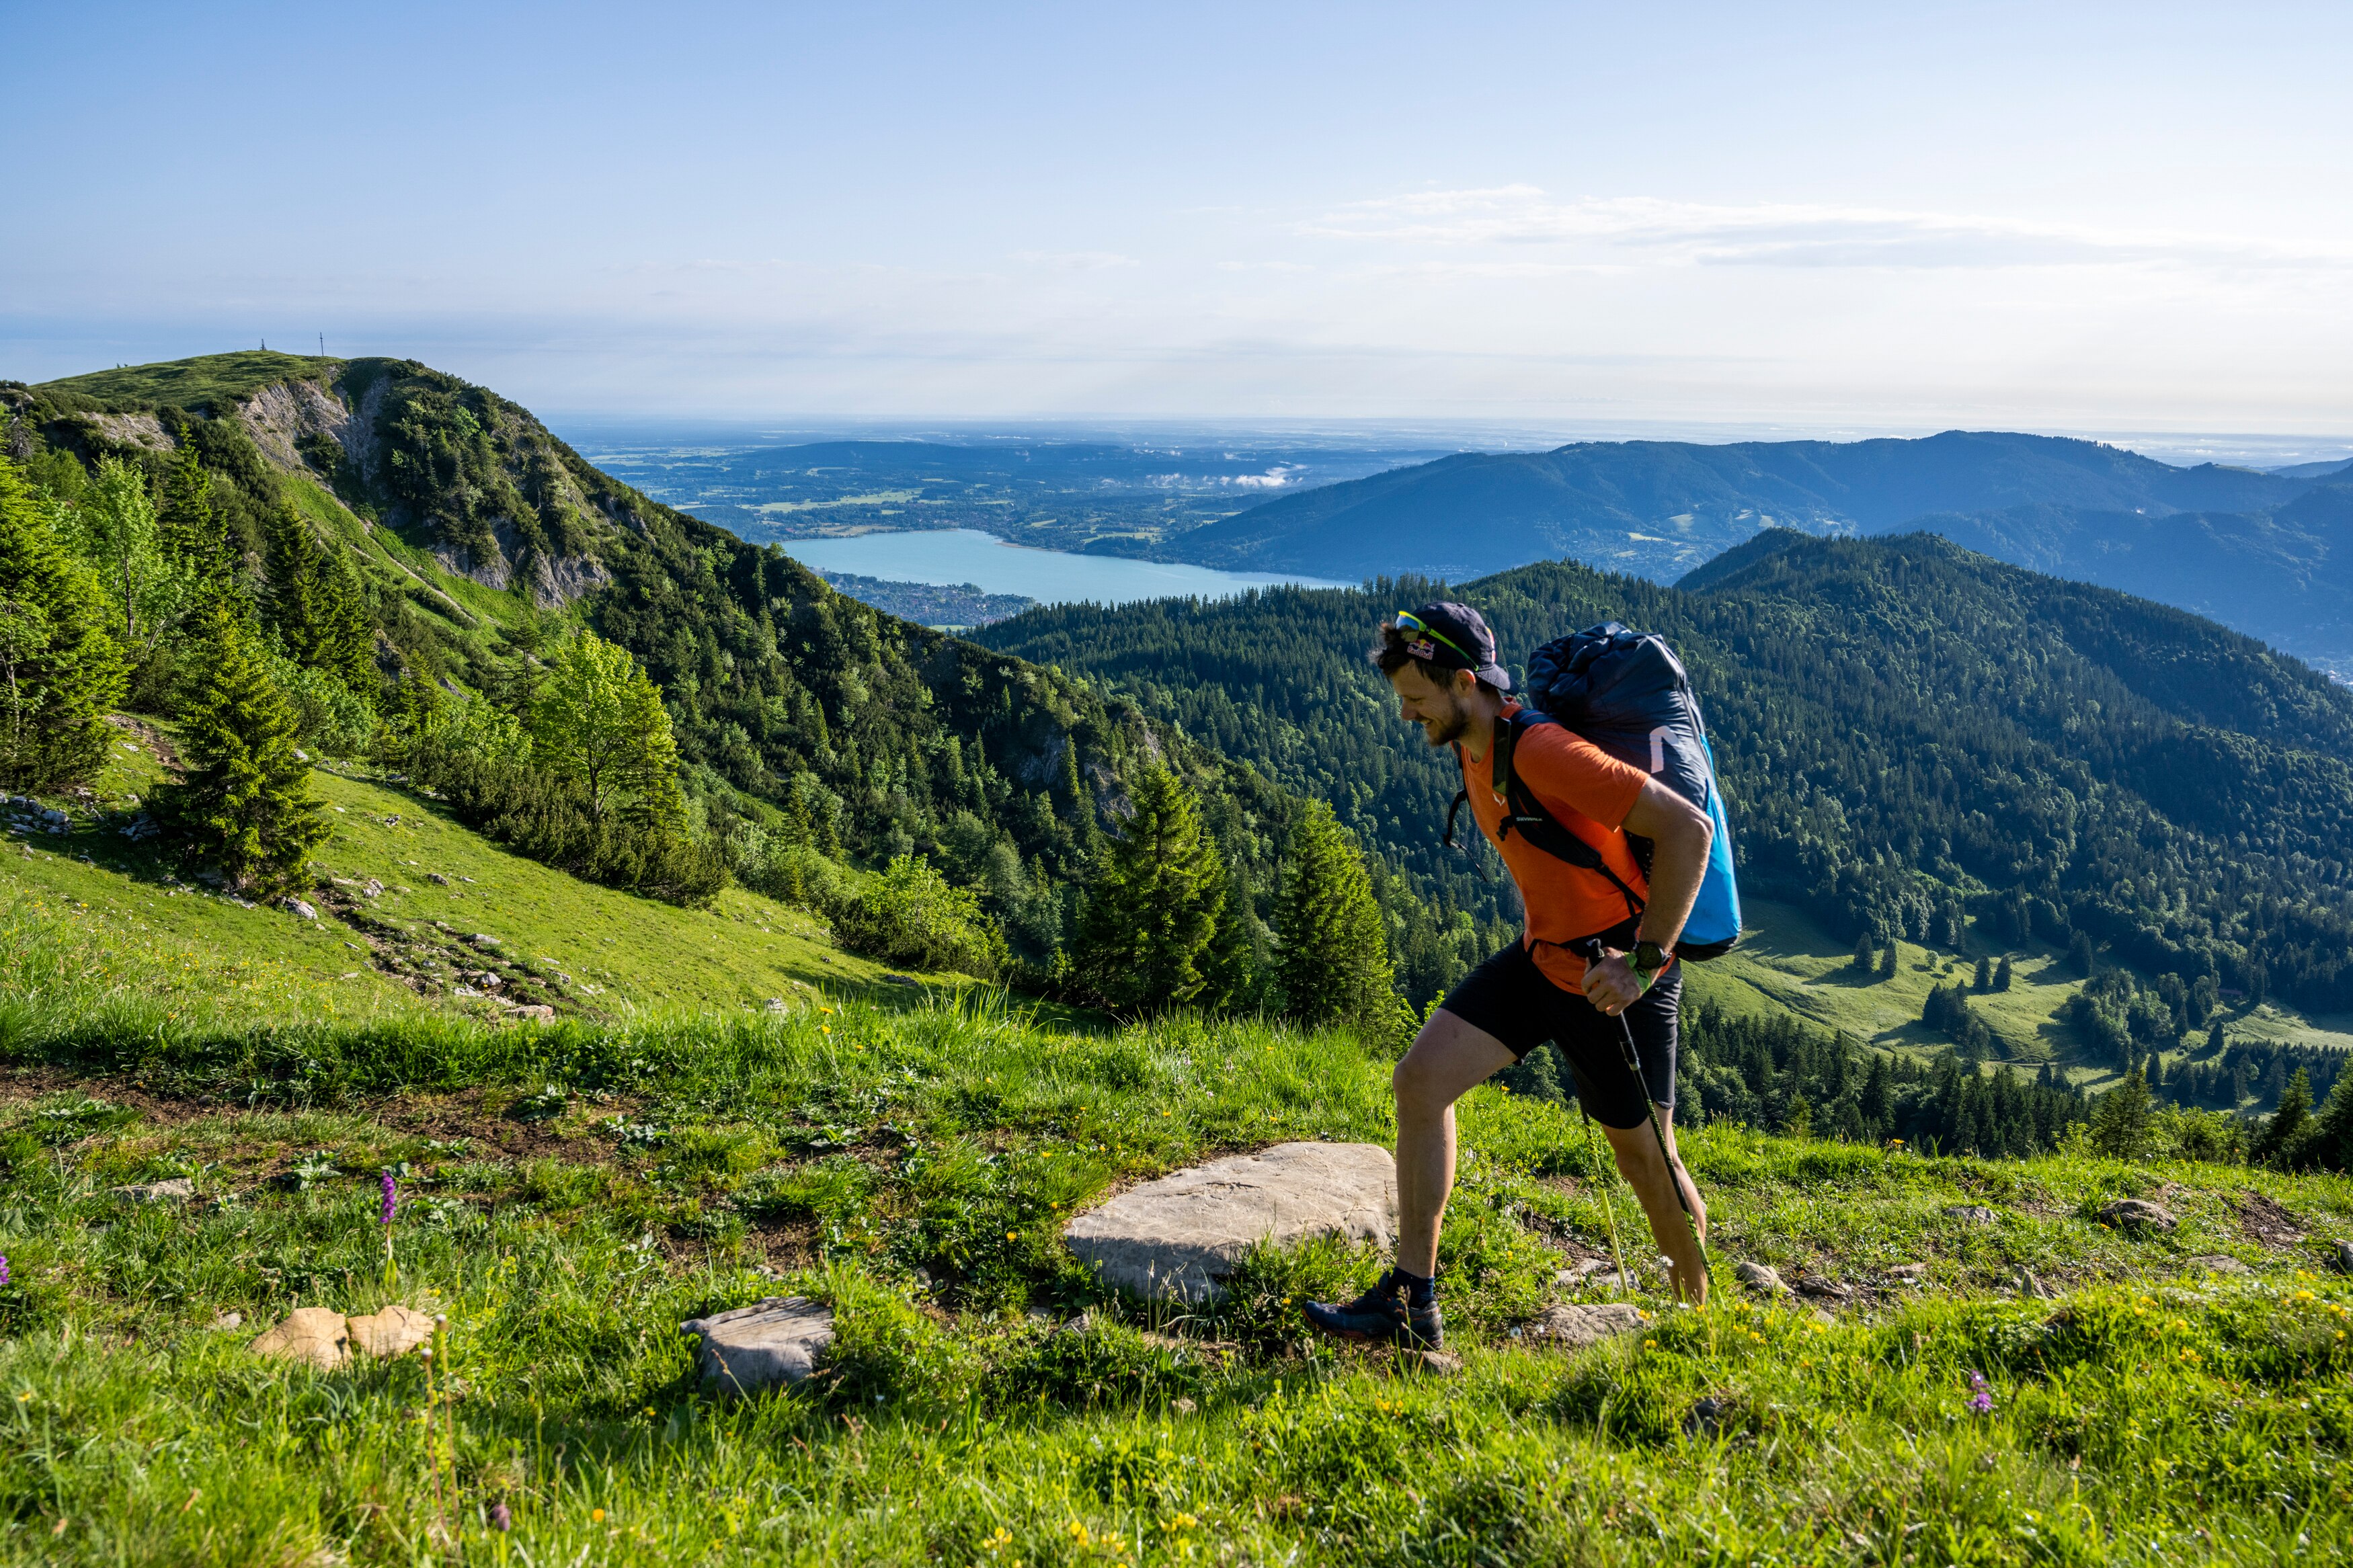 AUT1 hiking during Red Bull X-Alps on Hirschberg, Germany on June 22, 2021